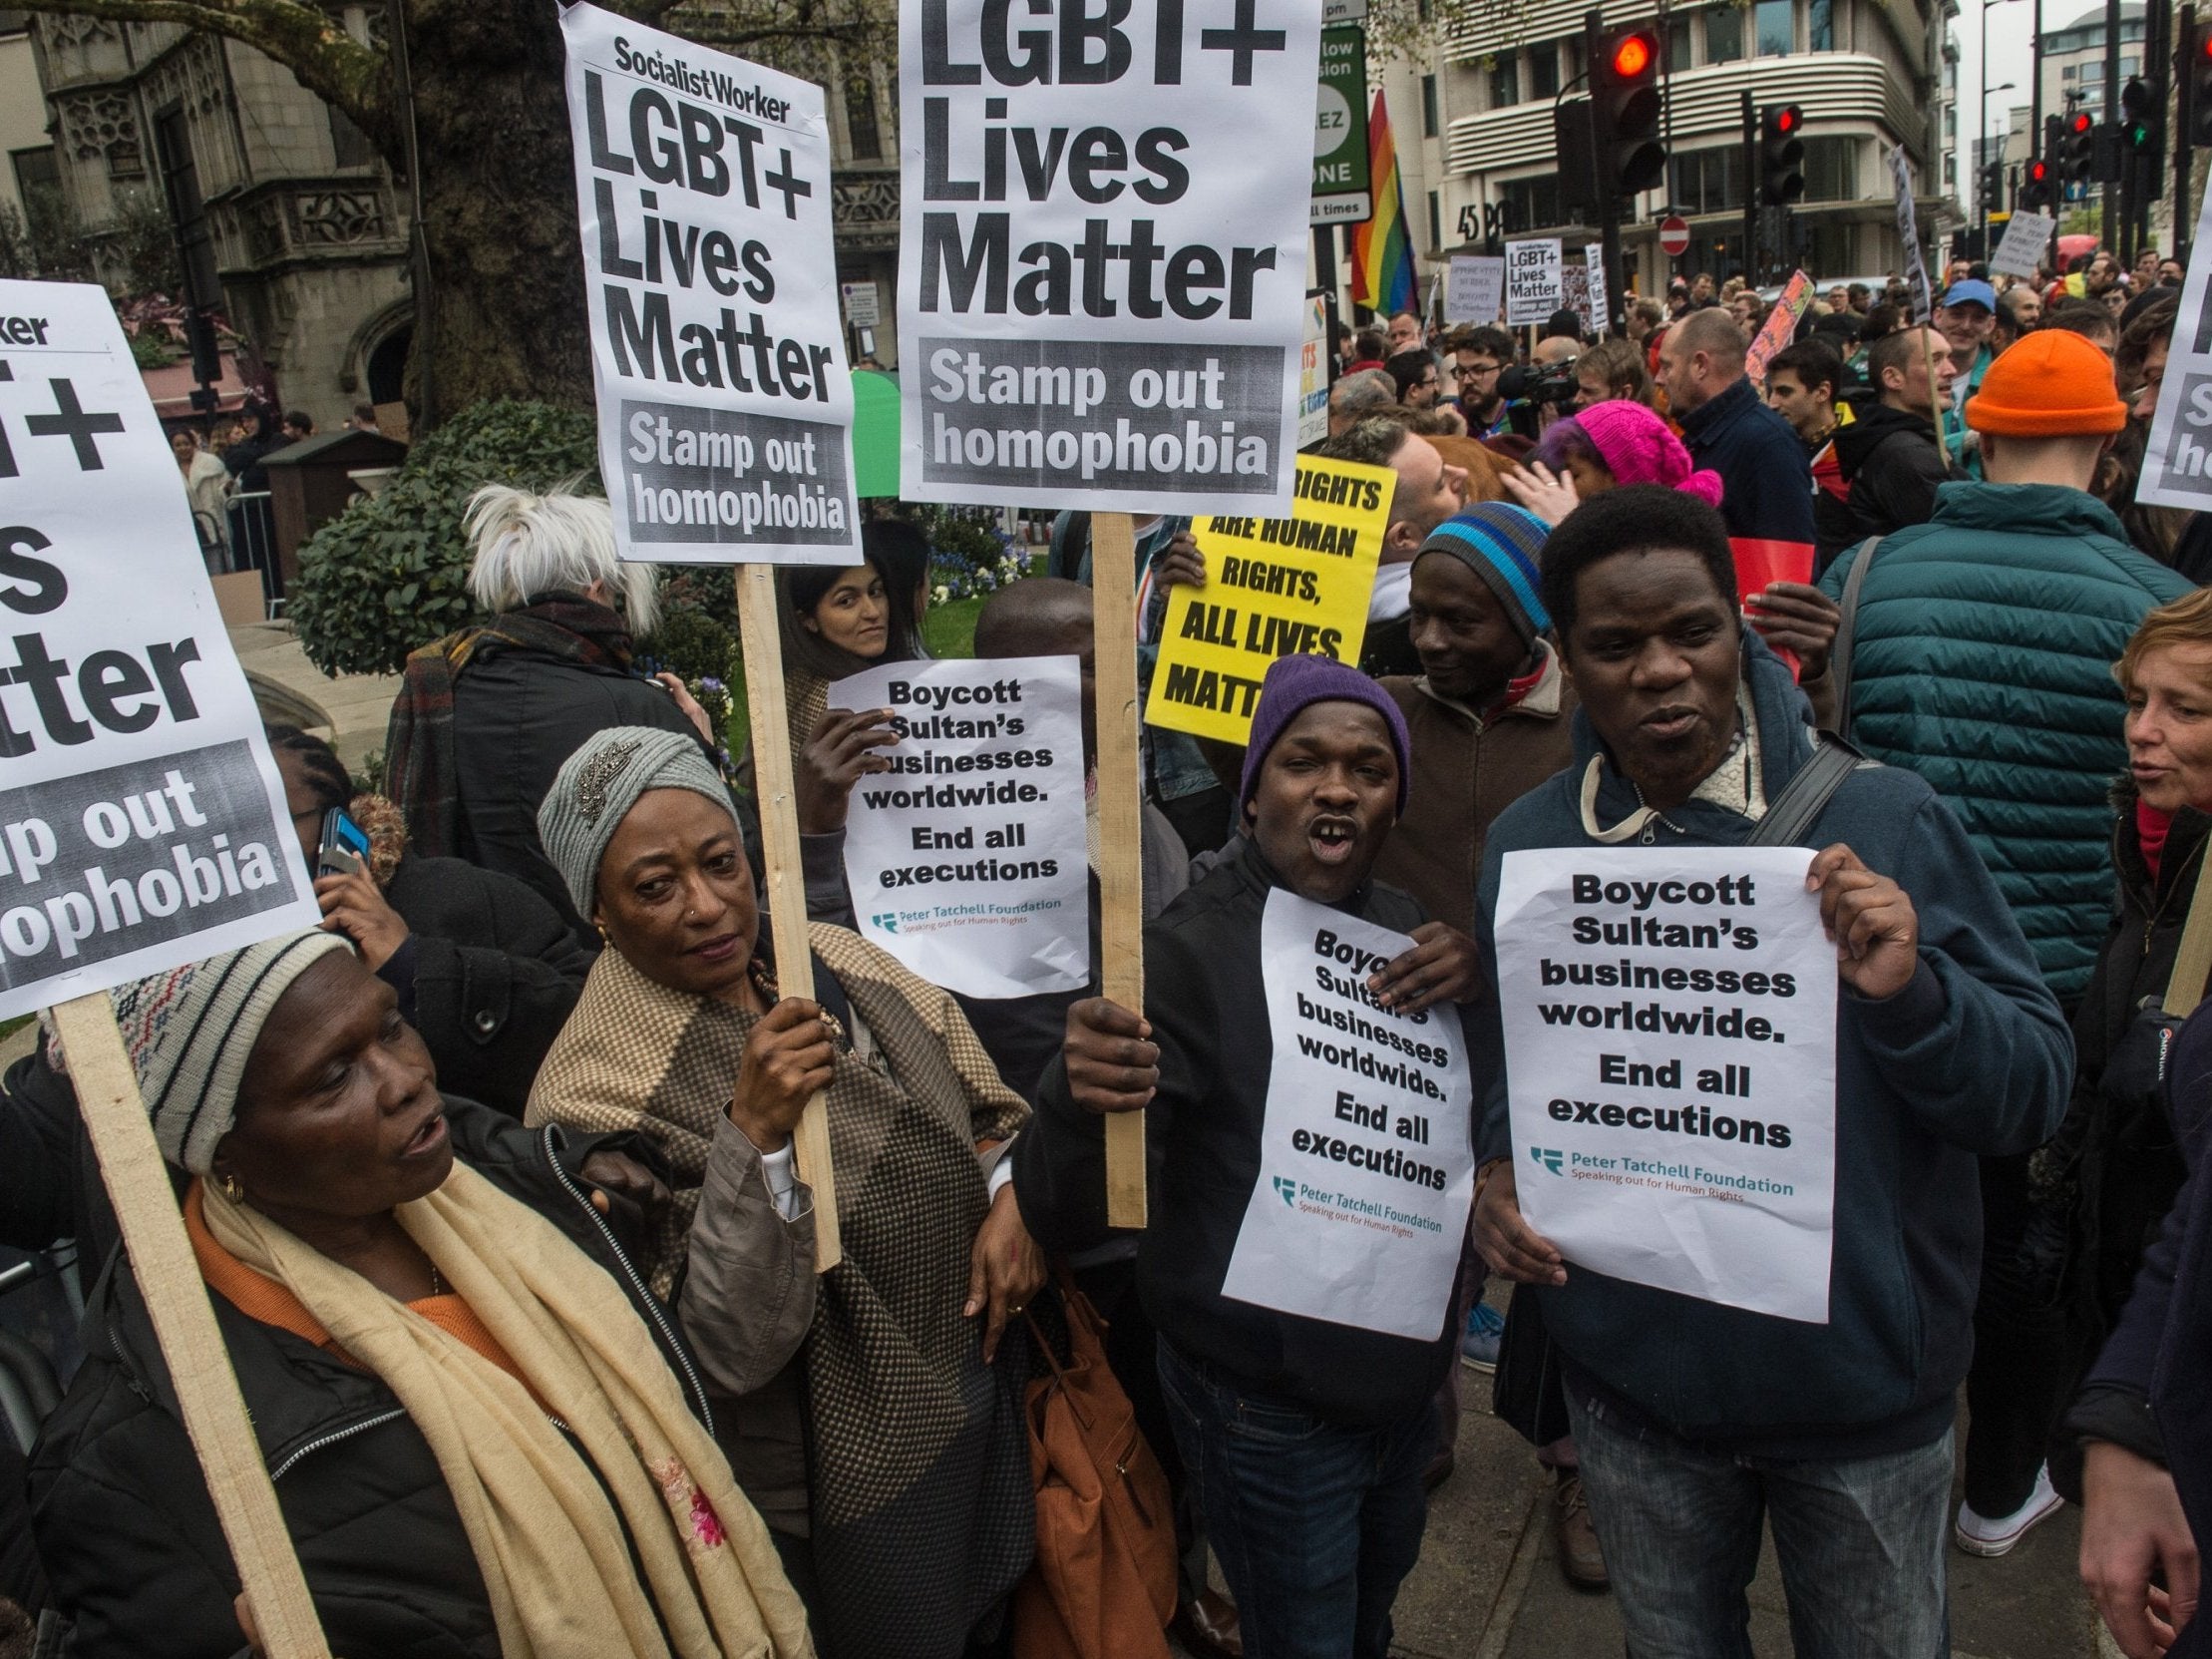 LGBT activists protest against the Sultan of Brunei who has ratified a law to make homosexuality punishable by stoning, at the Dorchester Hotel on April 6, 2019 in London, England.